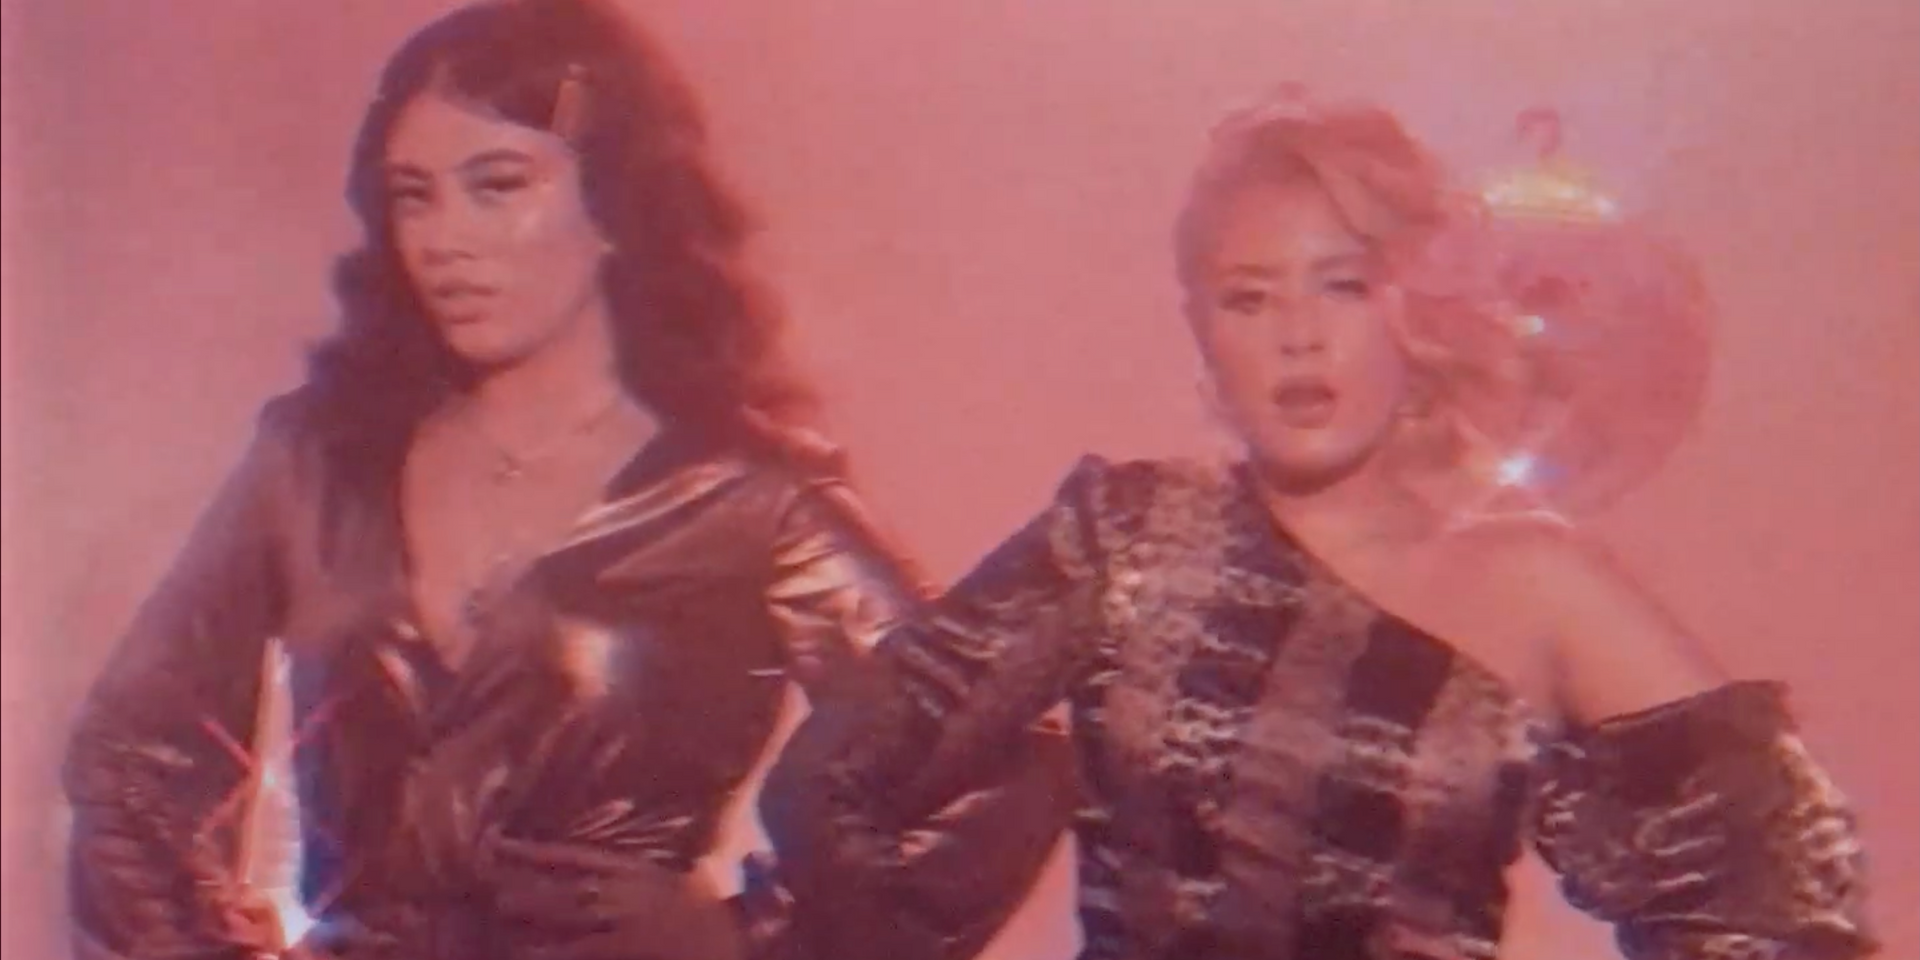 Sister duo Gibbs are disco queens in musical debut, 'No Hearts' – watch